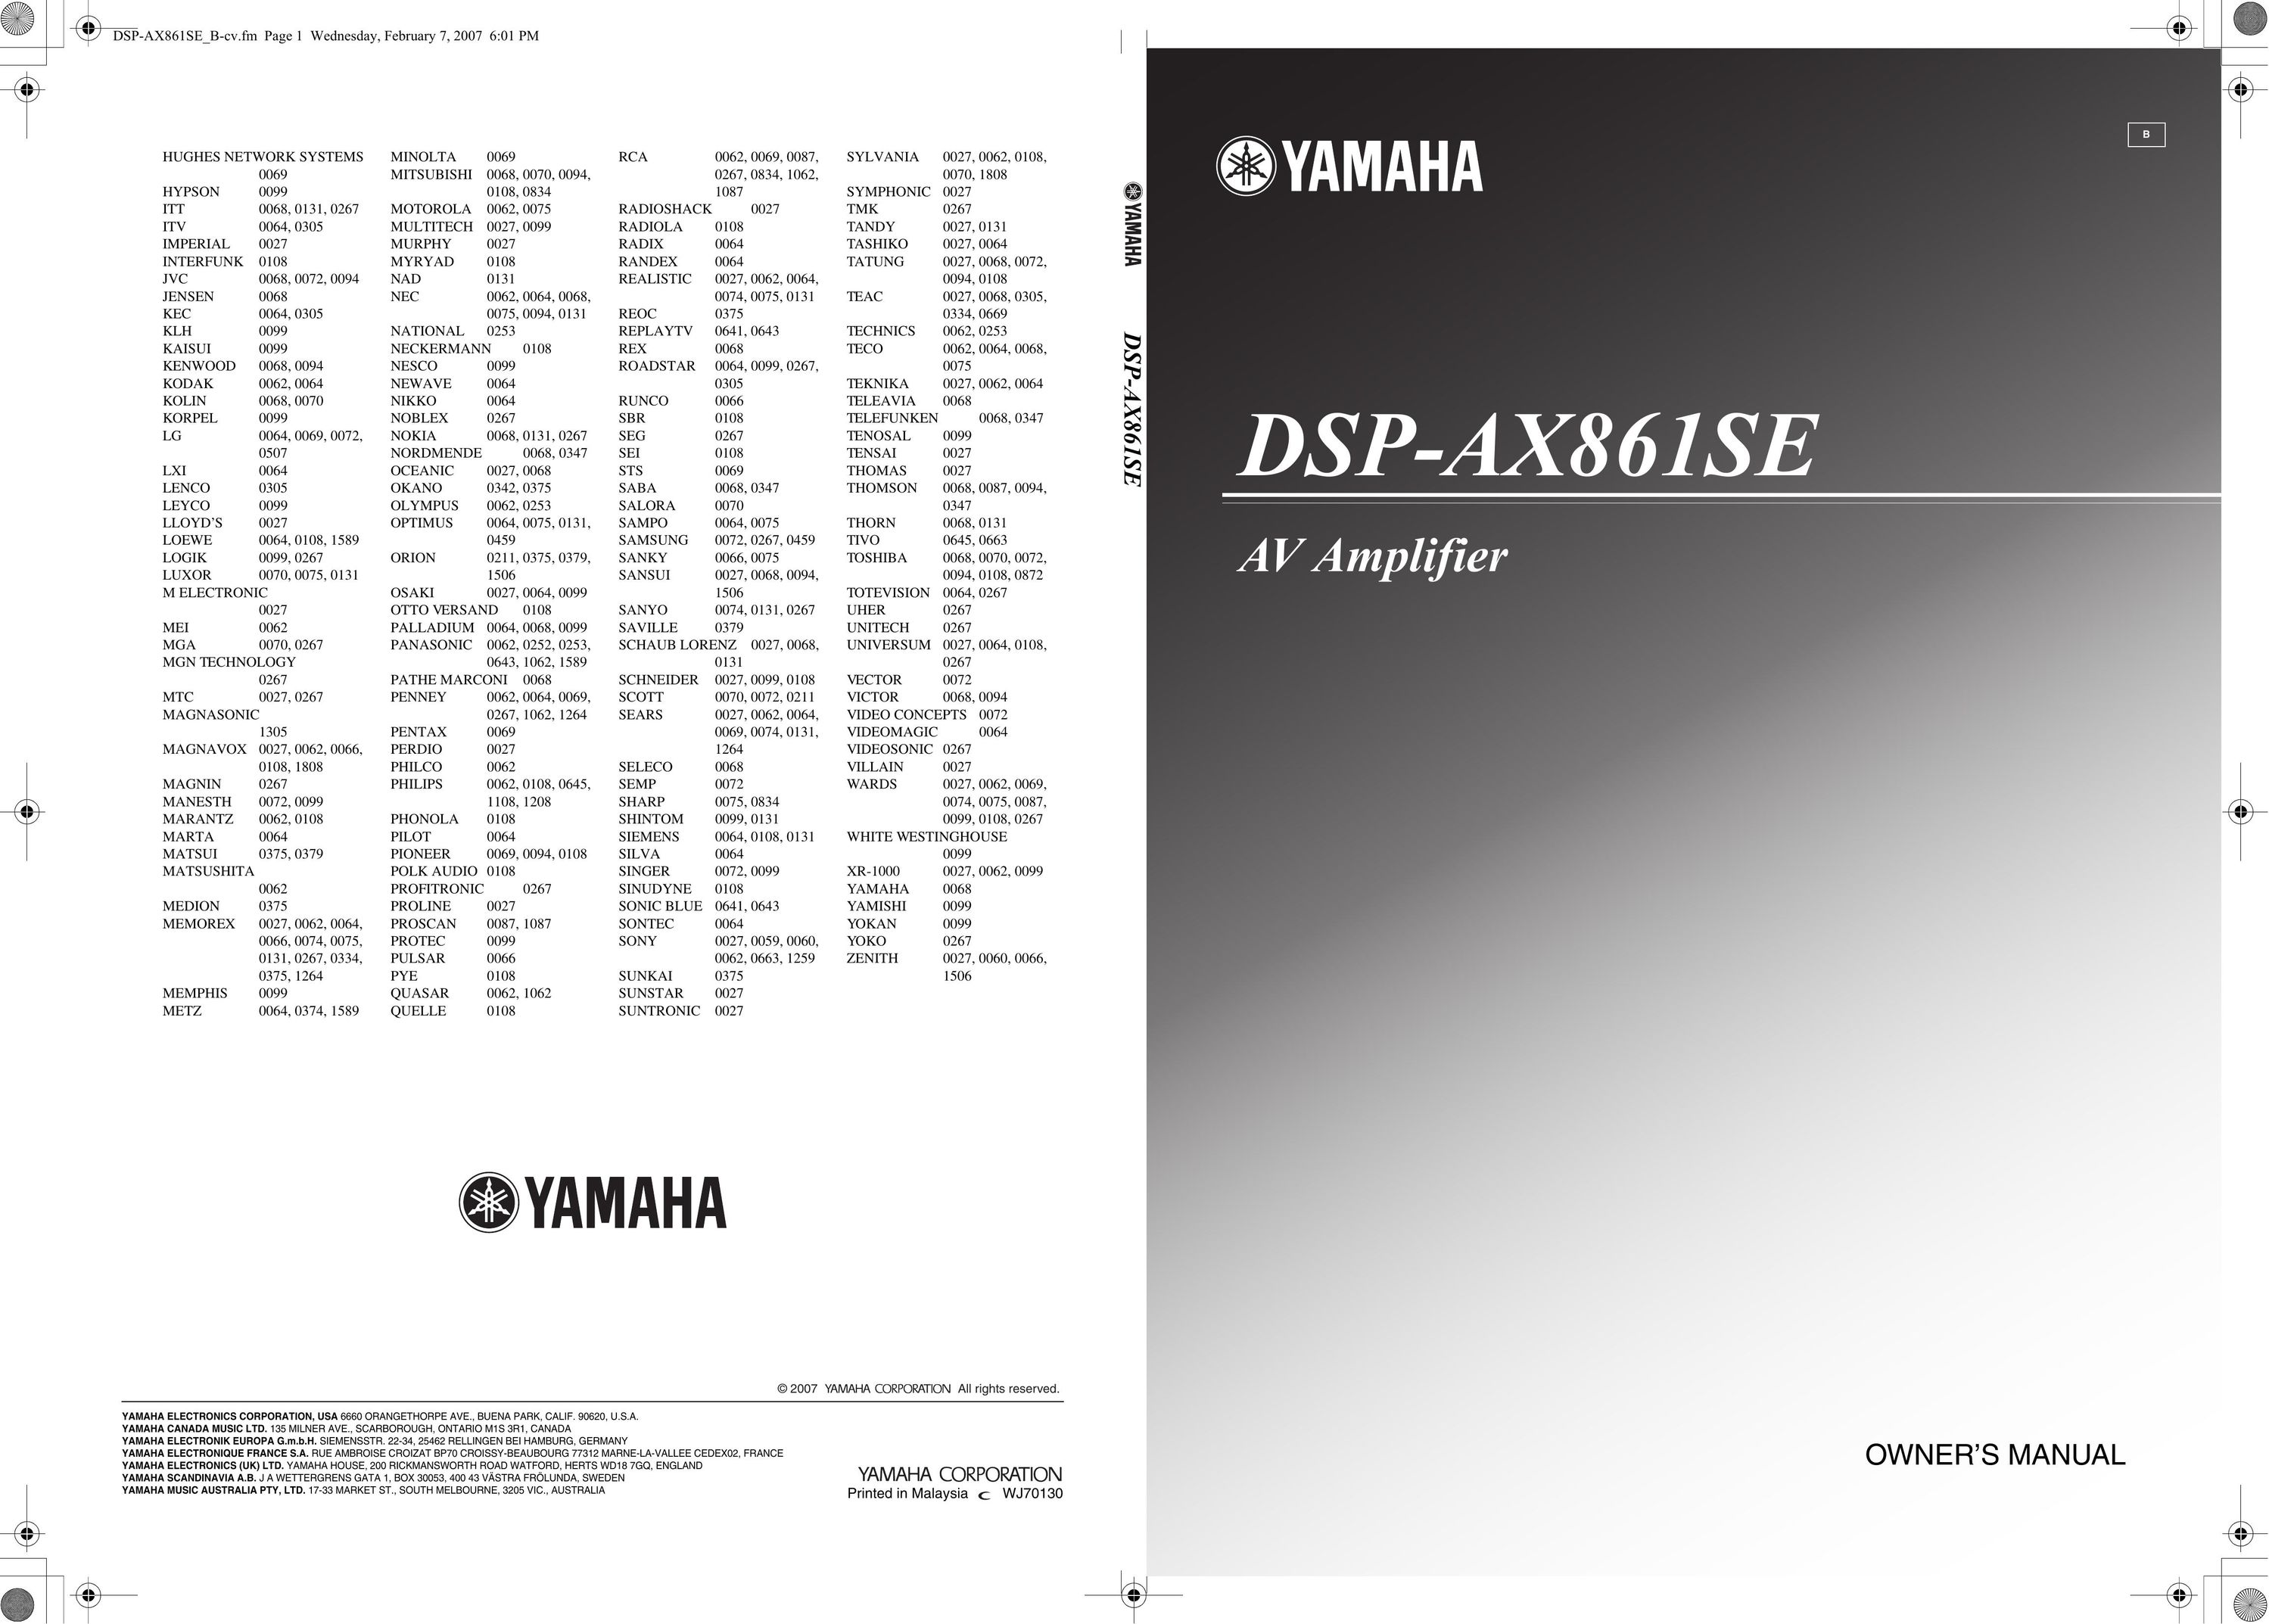 Yamaha DSP-AX861SE Home Theater System User Manual